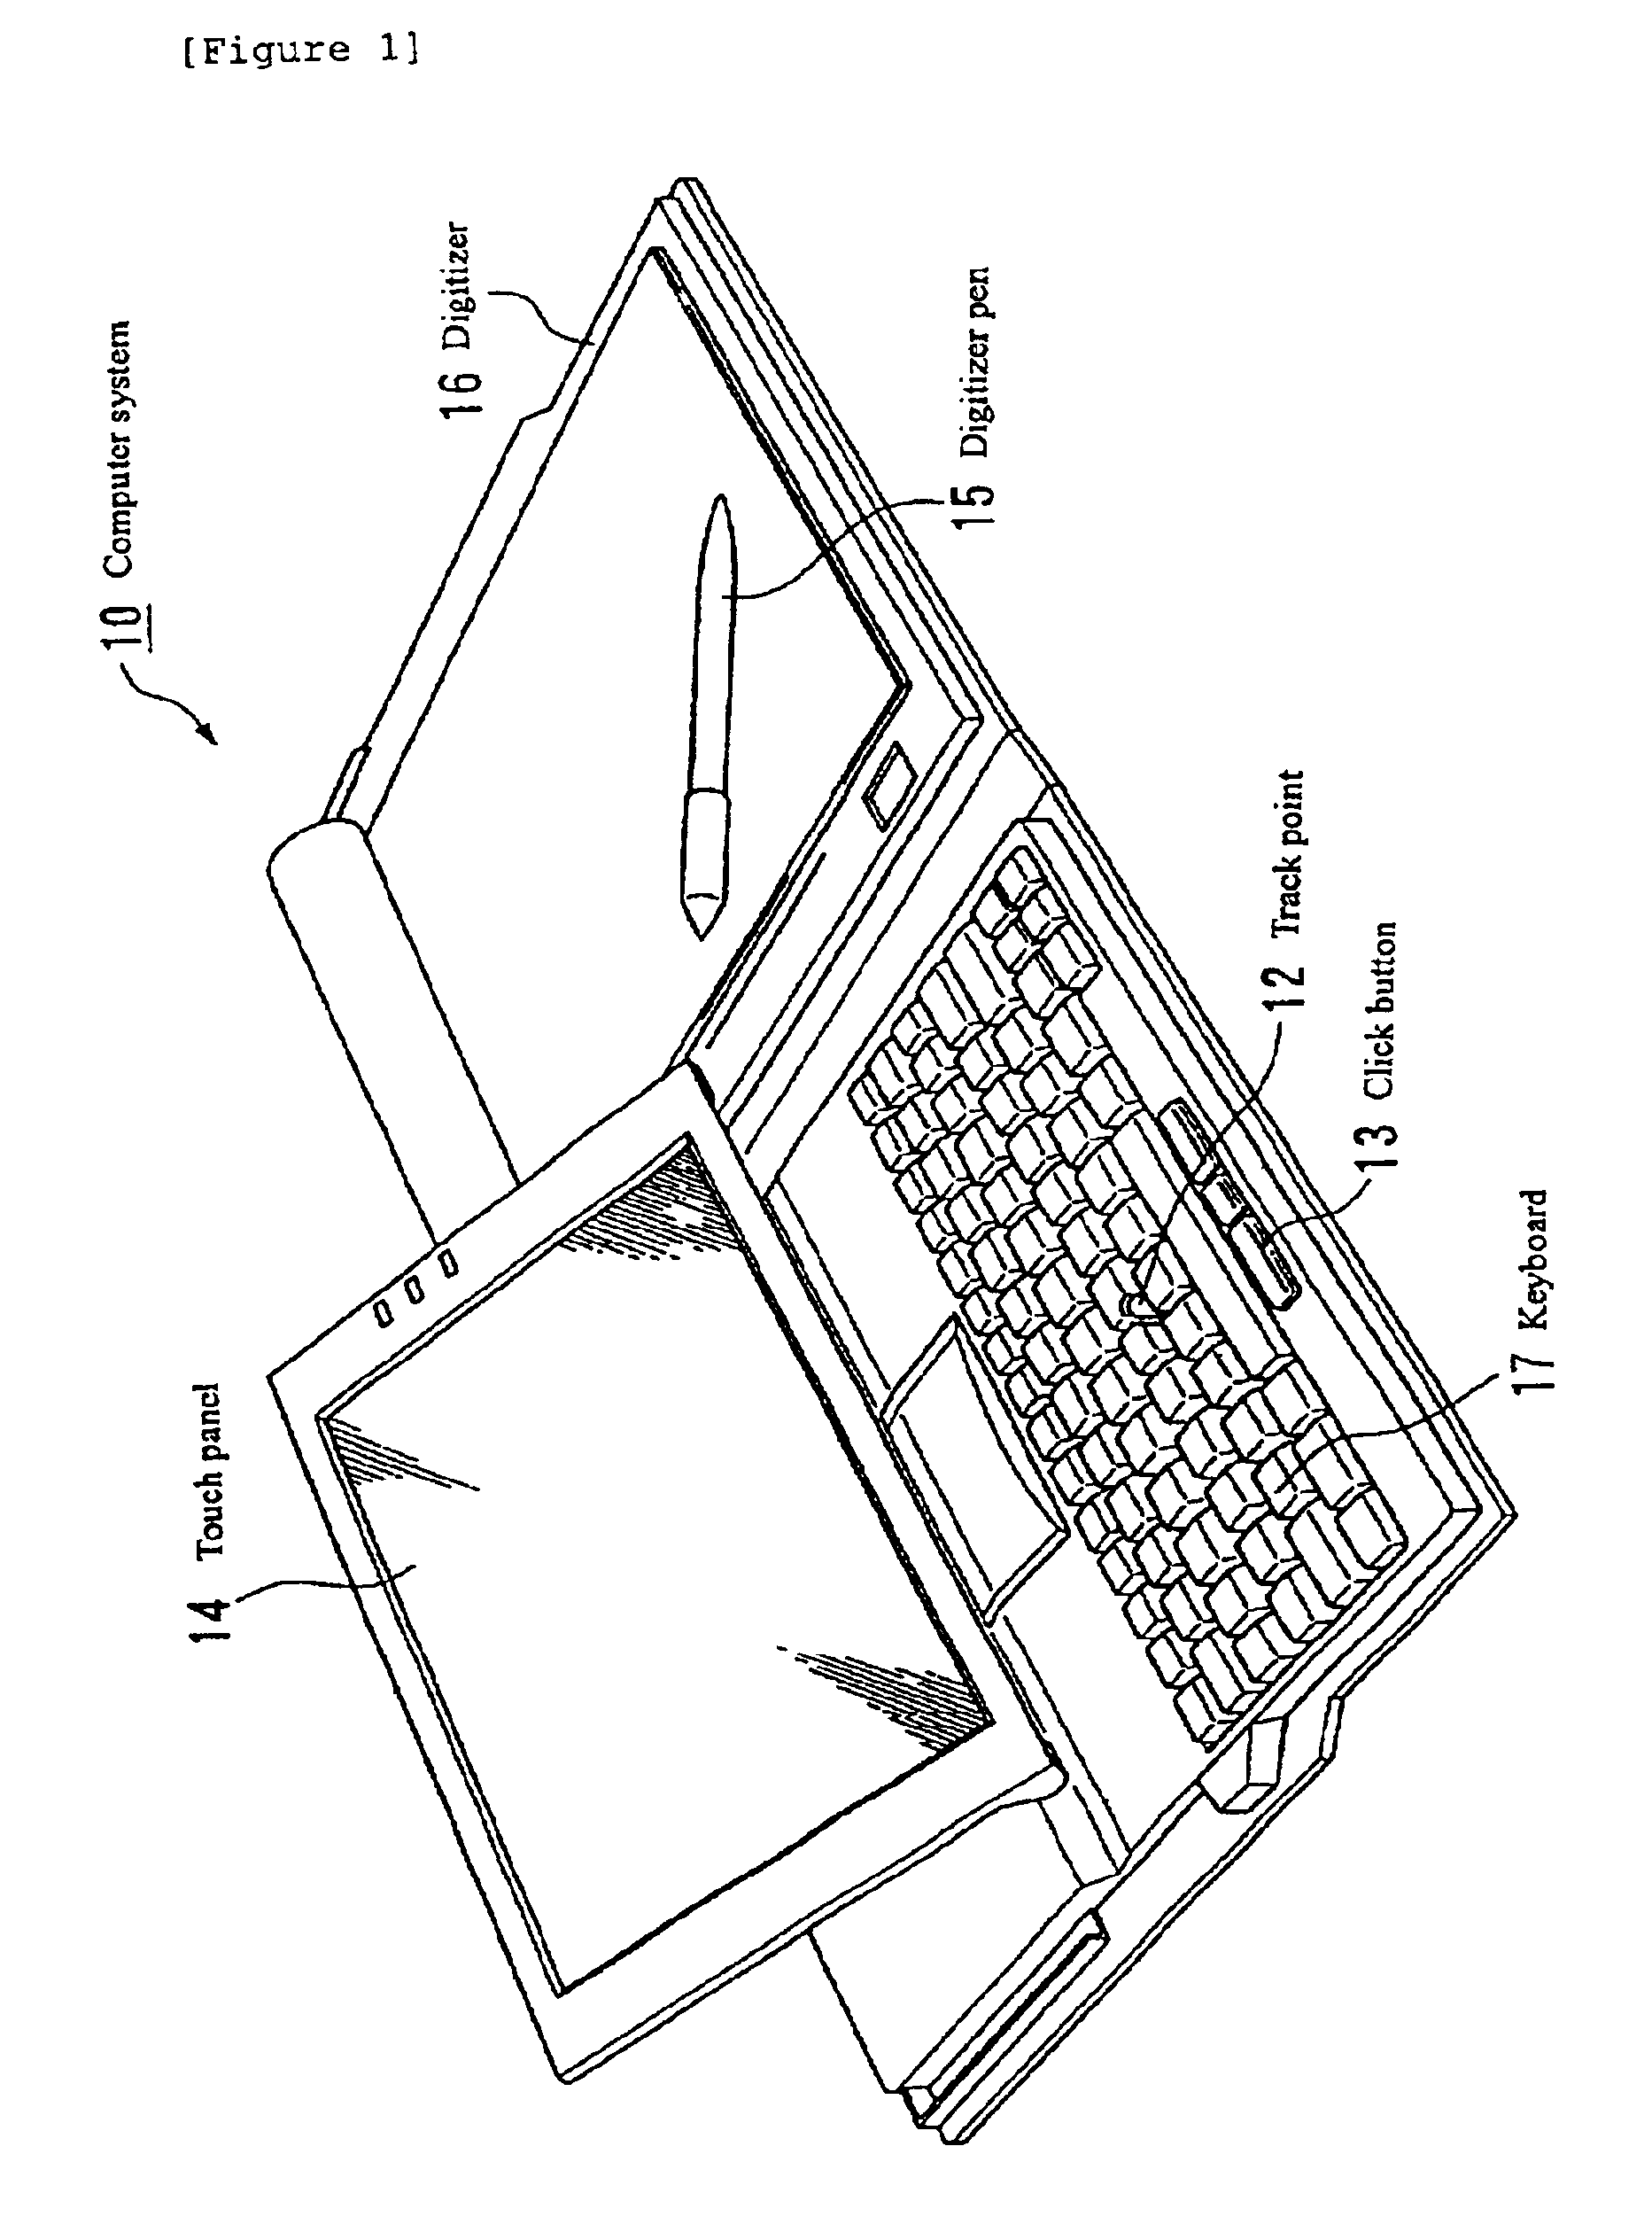 Computer system having a plurality of input devices and associated double-click parameters